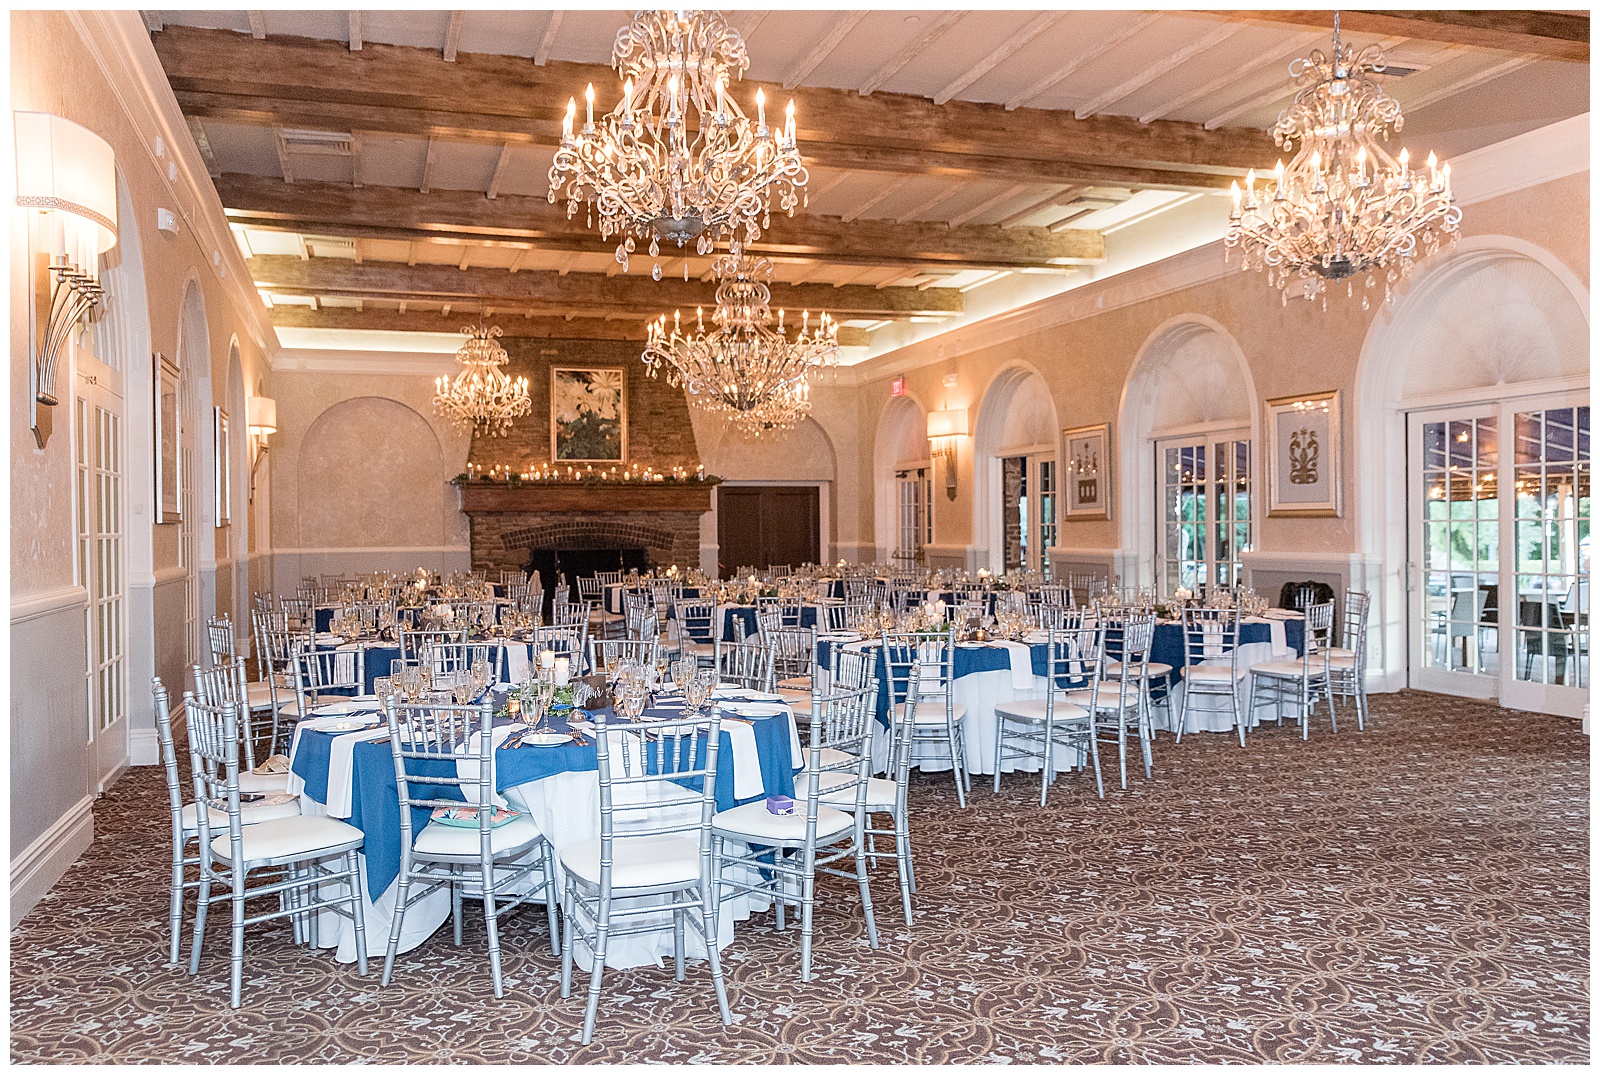 tables with white and blue linens and chairs all set up for beautiful wedding reception inside north jersey country club